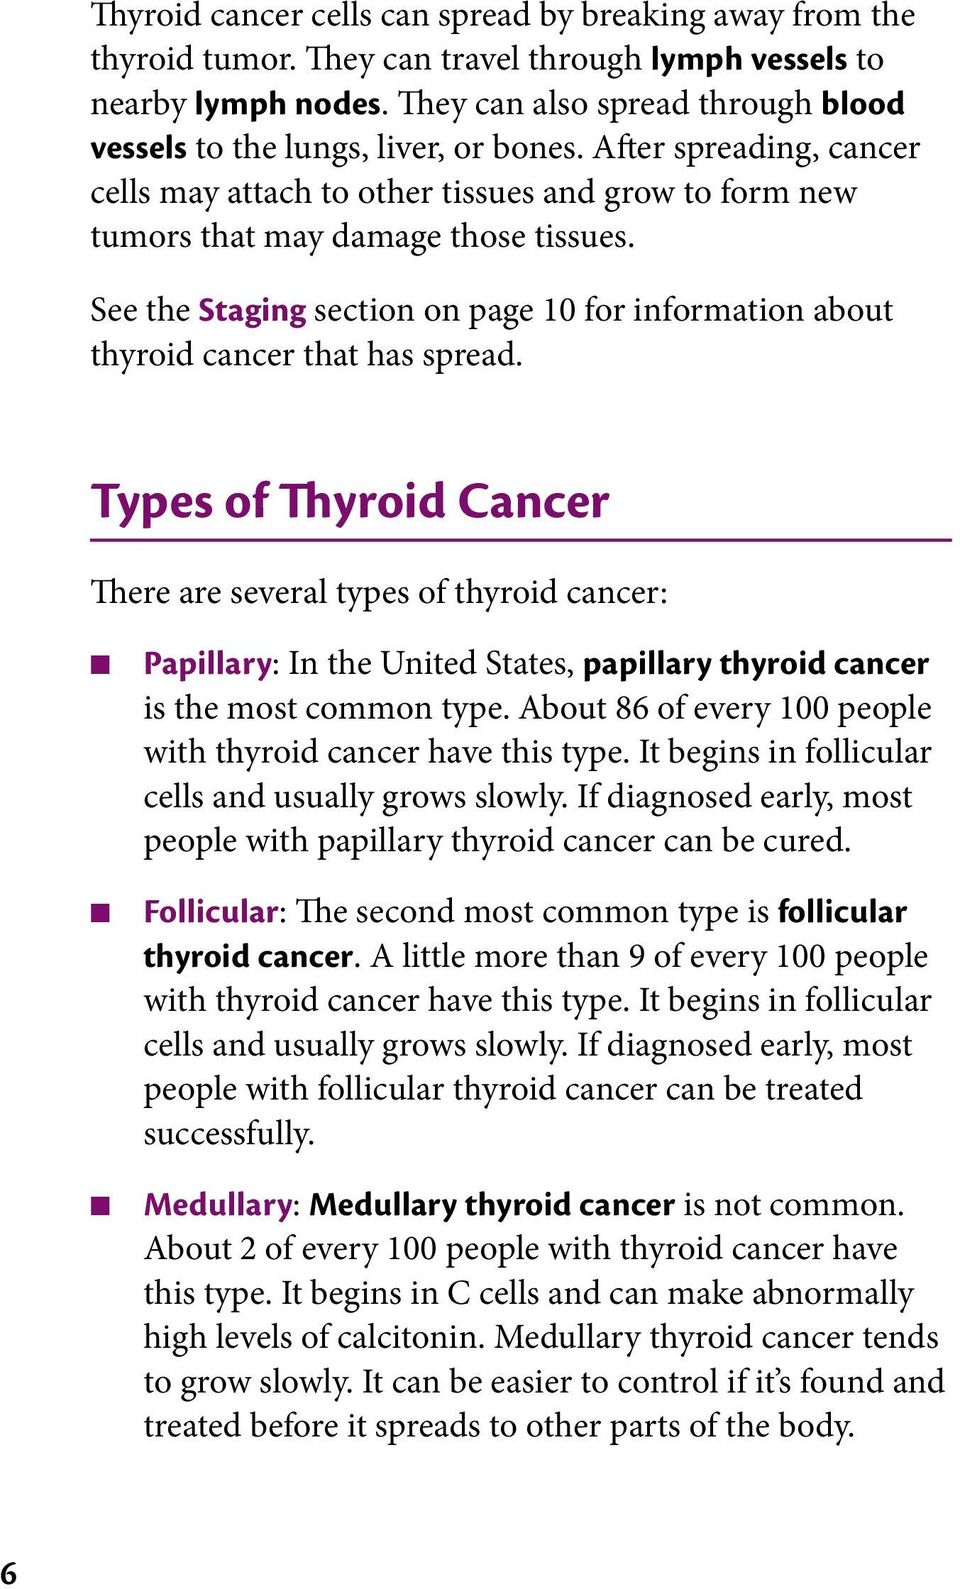 See the Staging section on page 10 for information about thyroid cancer that has spread.